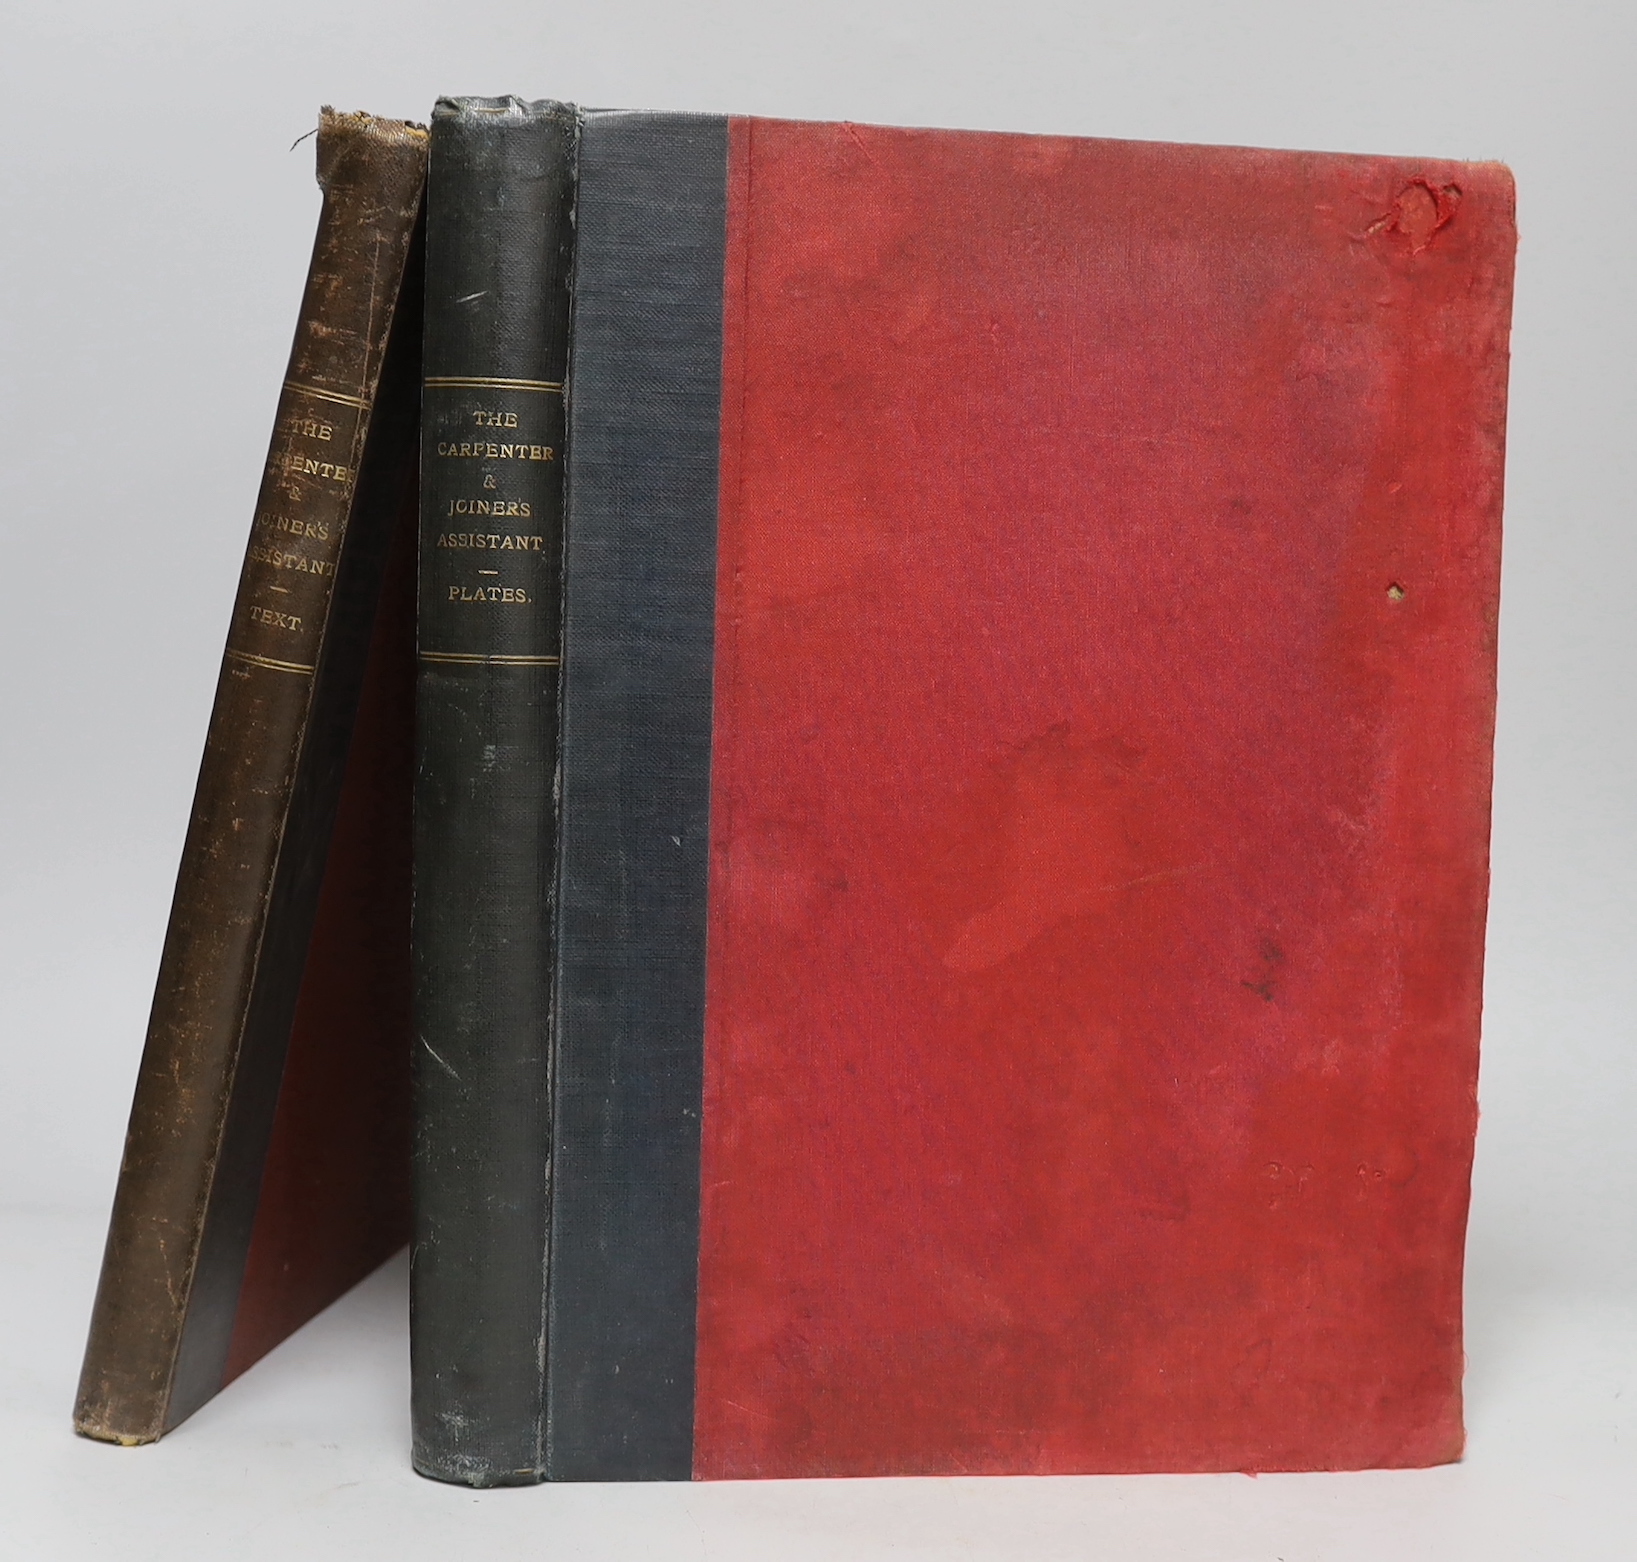 Newlands, James- The Carpenter and Joiner’s Assistant, 2 vols, (text and plates), small folio, quarter cloth, Blackie and Son, Glasgow, 1890